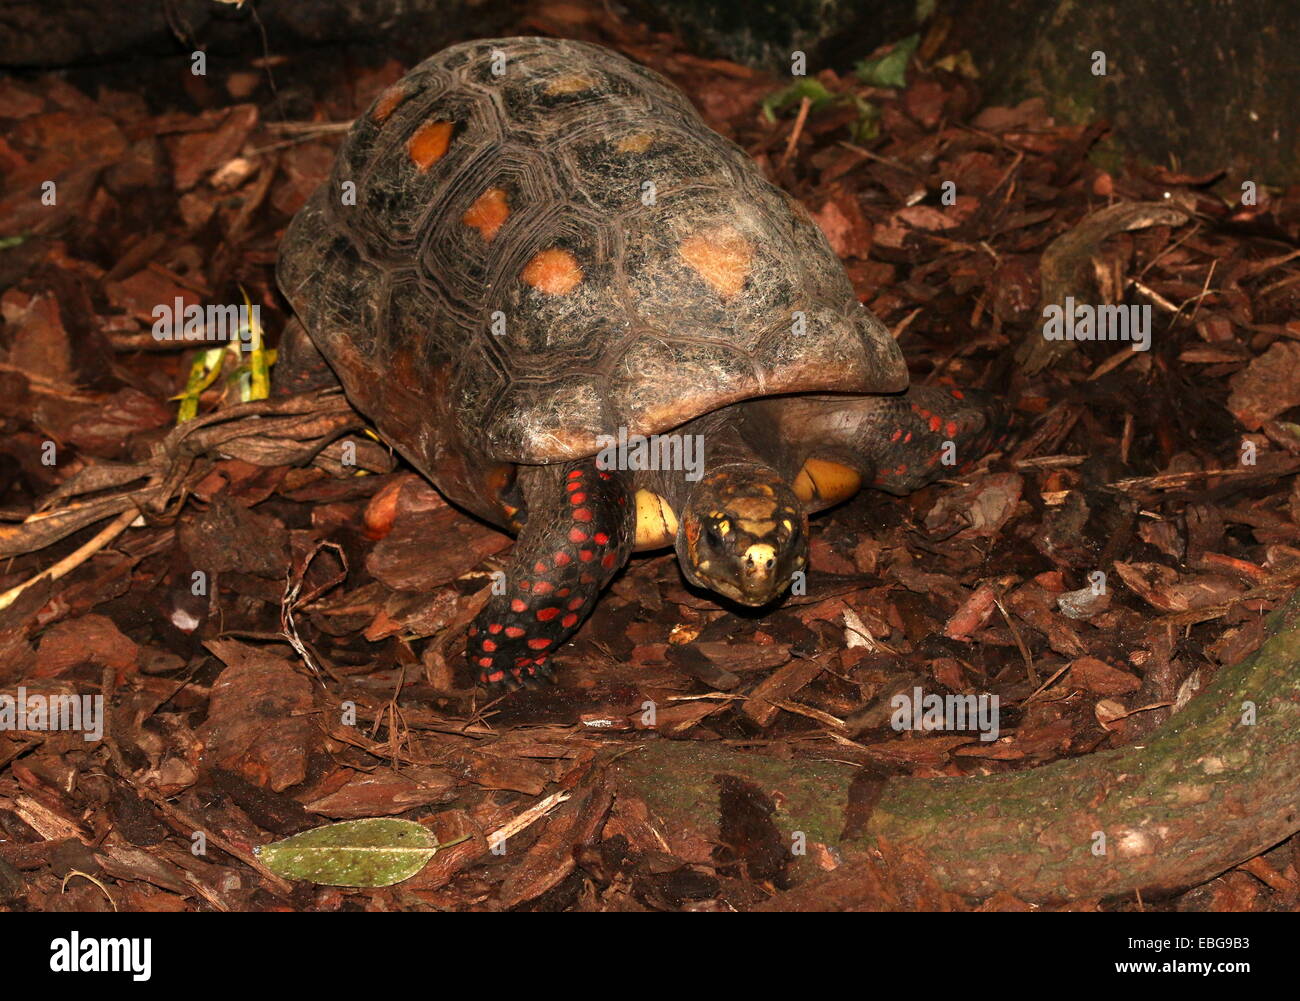 Close-up of a South American Red-footed tortoise (Chelonoidis carbonaria) Stock Photo